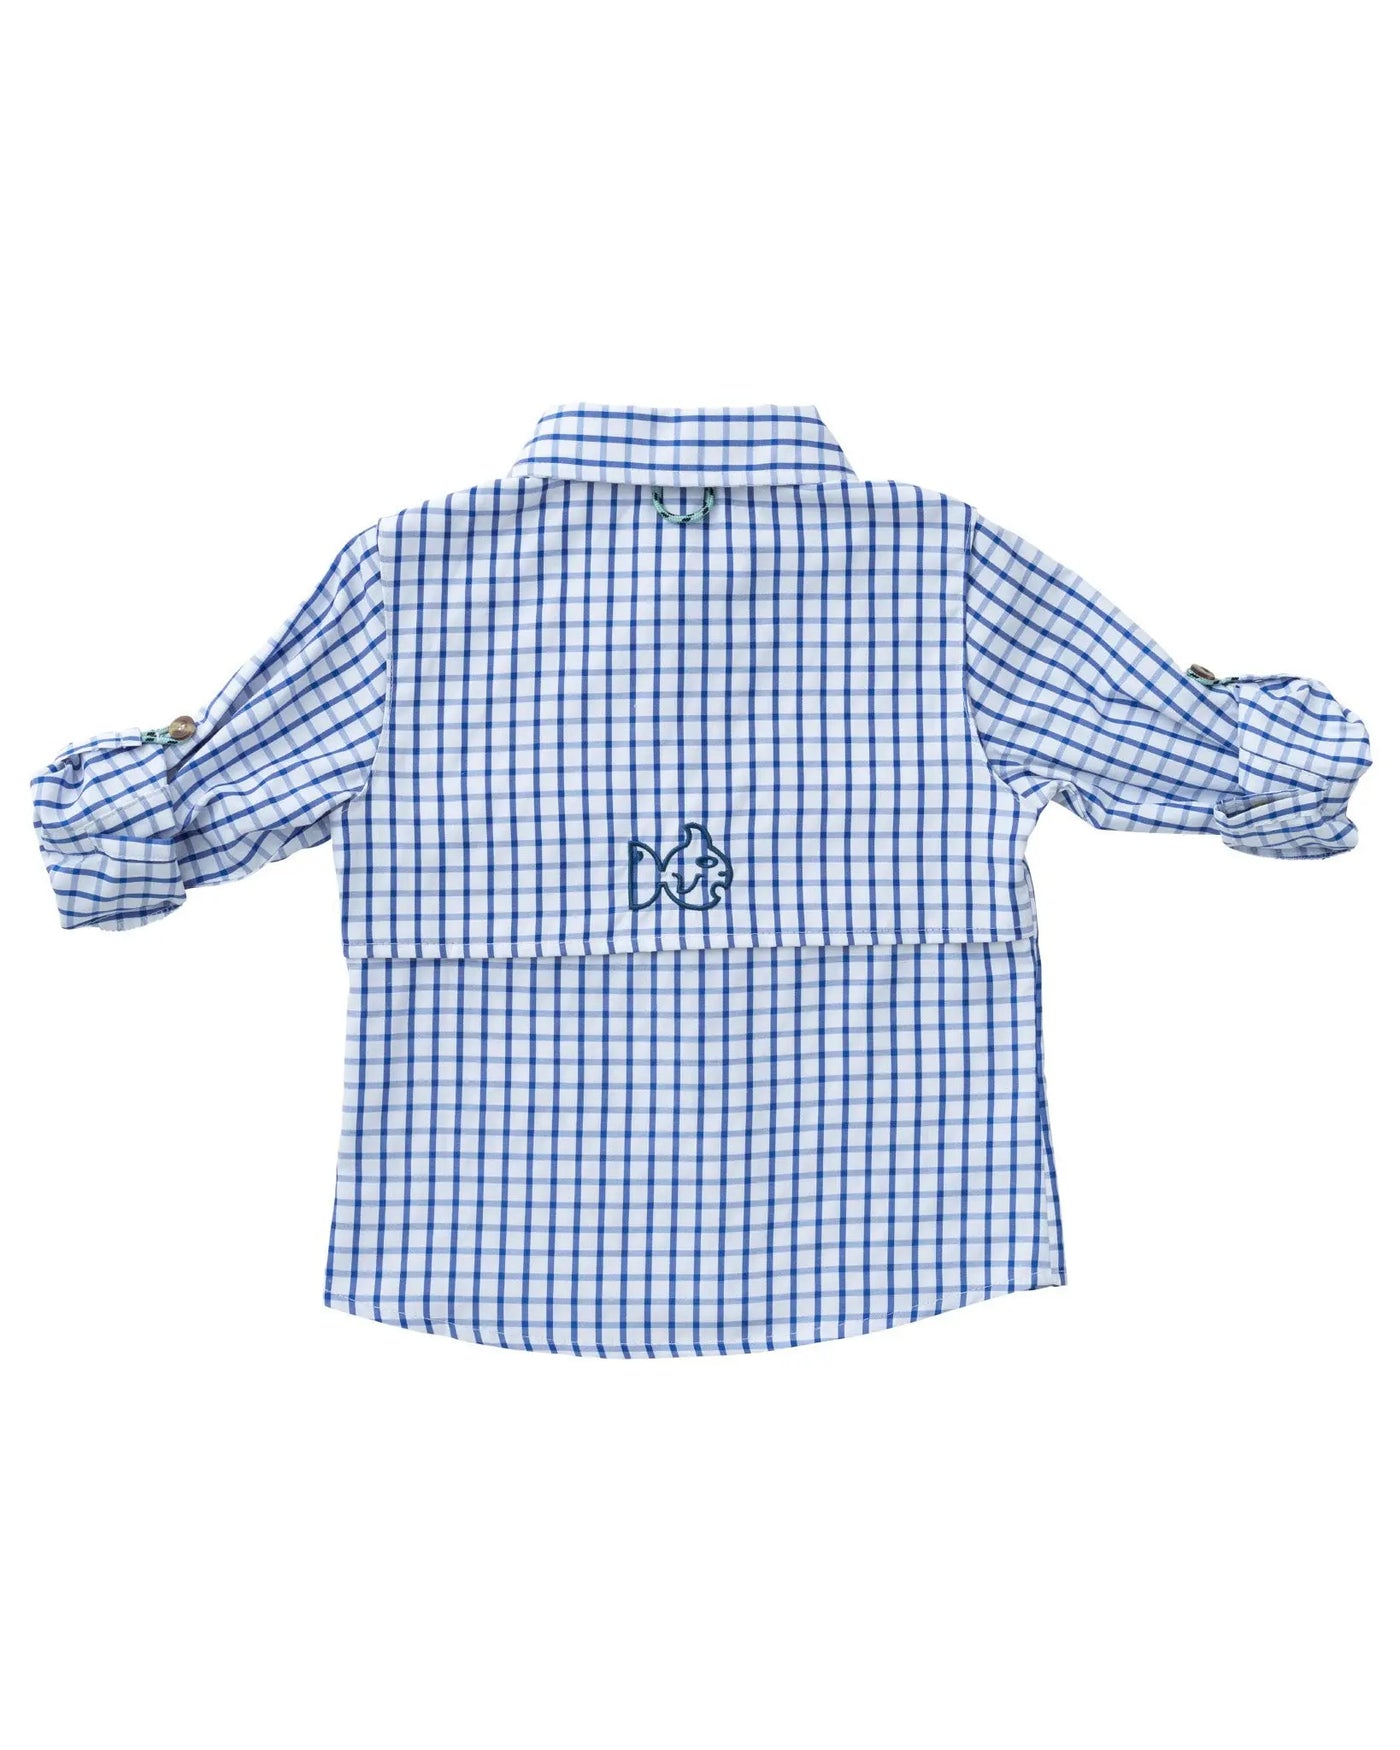 Vented Back Fishing Shirt in Blueberry Pie Prodoh